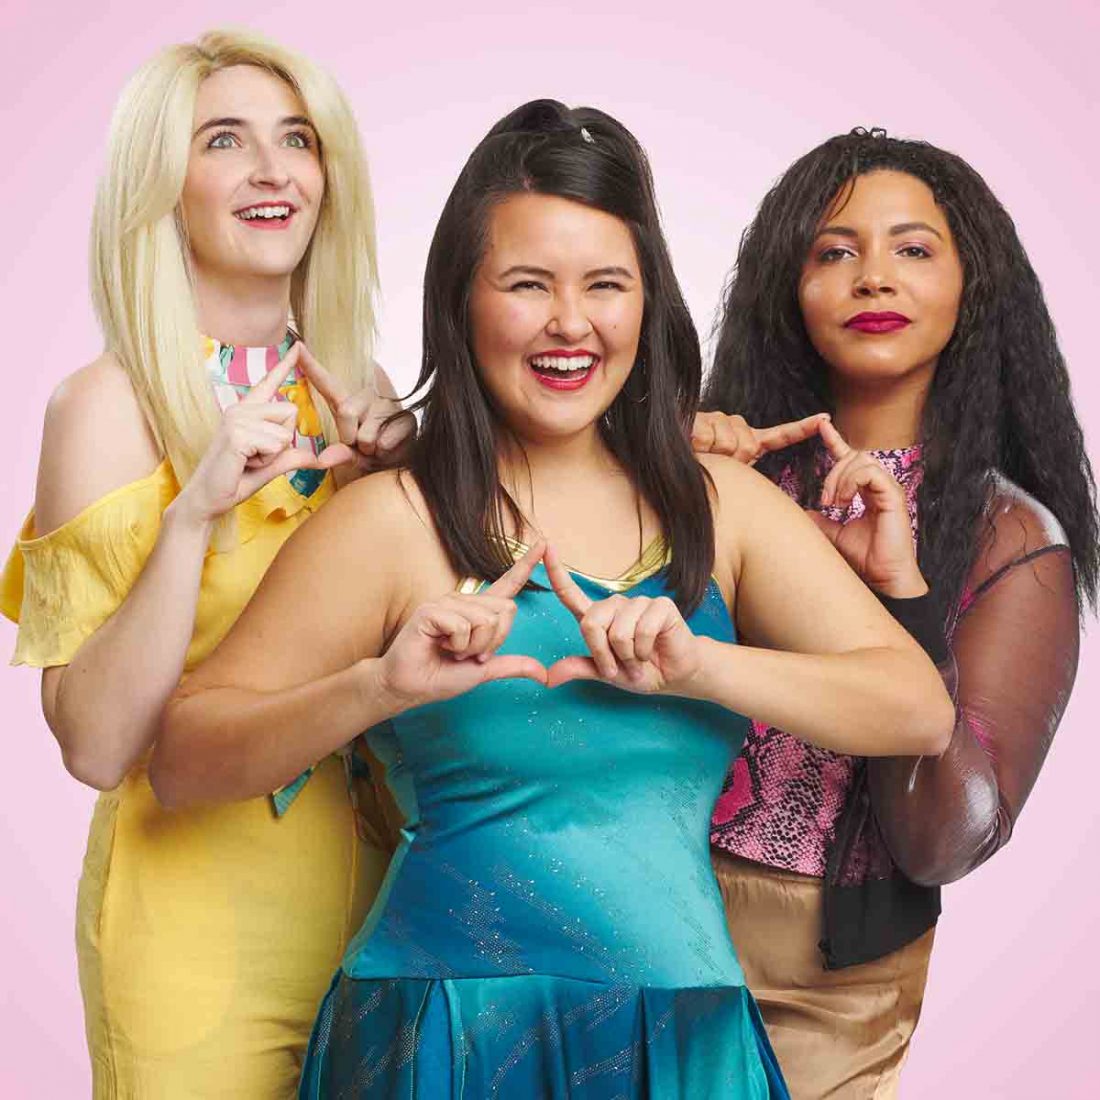 Group character portrait of Left to right: Molly Doris-Pierce as Margot, Kennedy McAllister As Serena, and Michaela Modica as Pilar